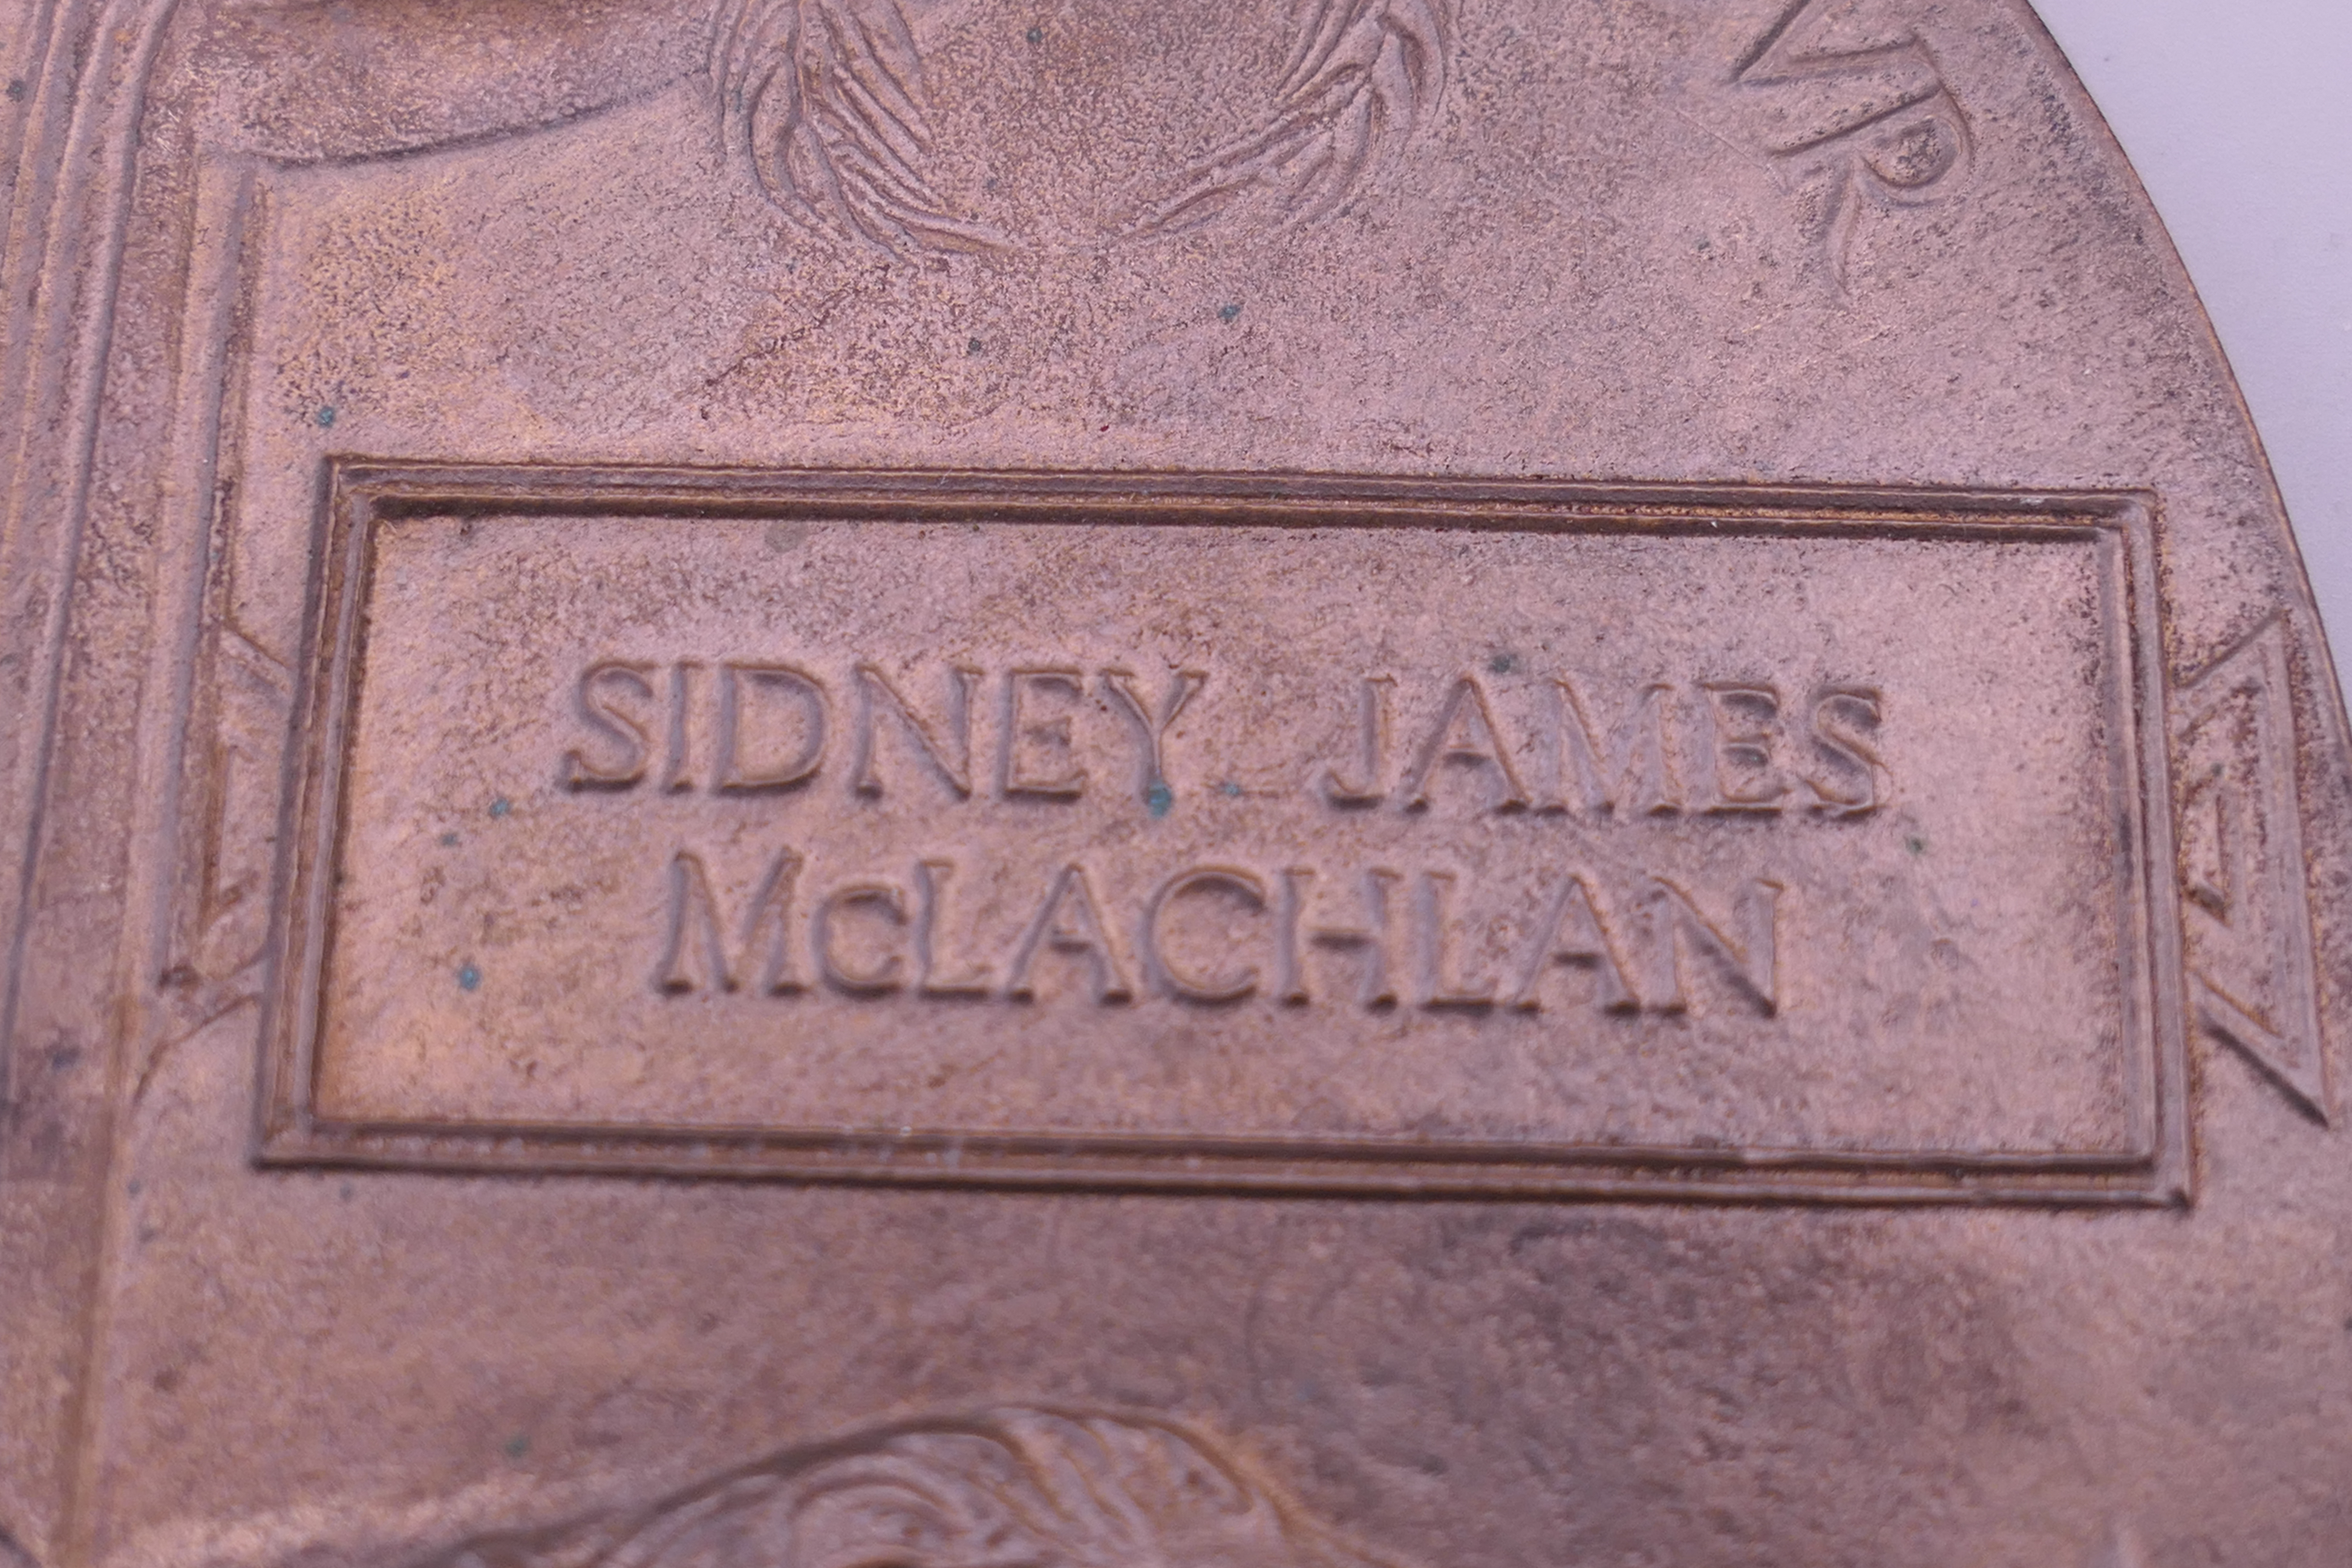 A Canadian WWI memorial death plaque for Sidney James McLachlan. 12 cm diameter. - Image 3 of 6